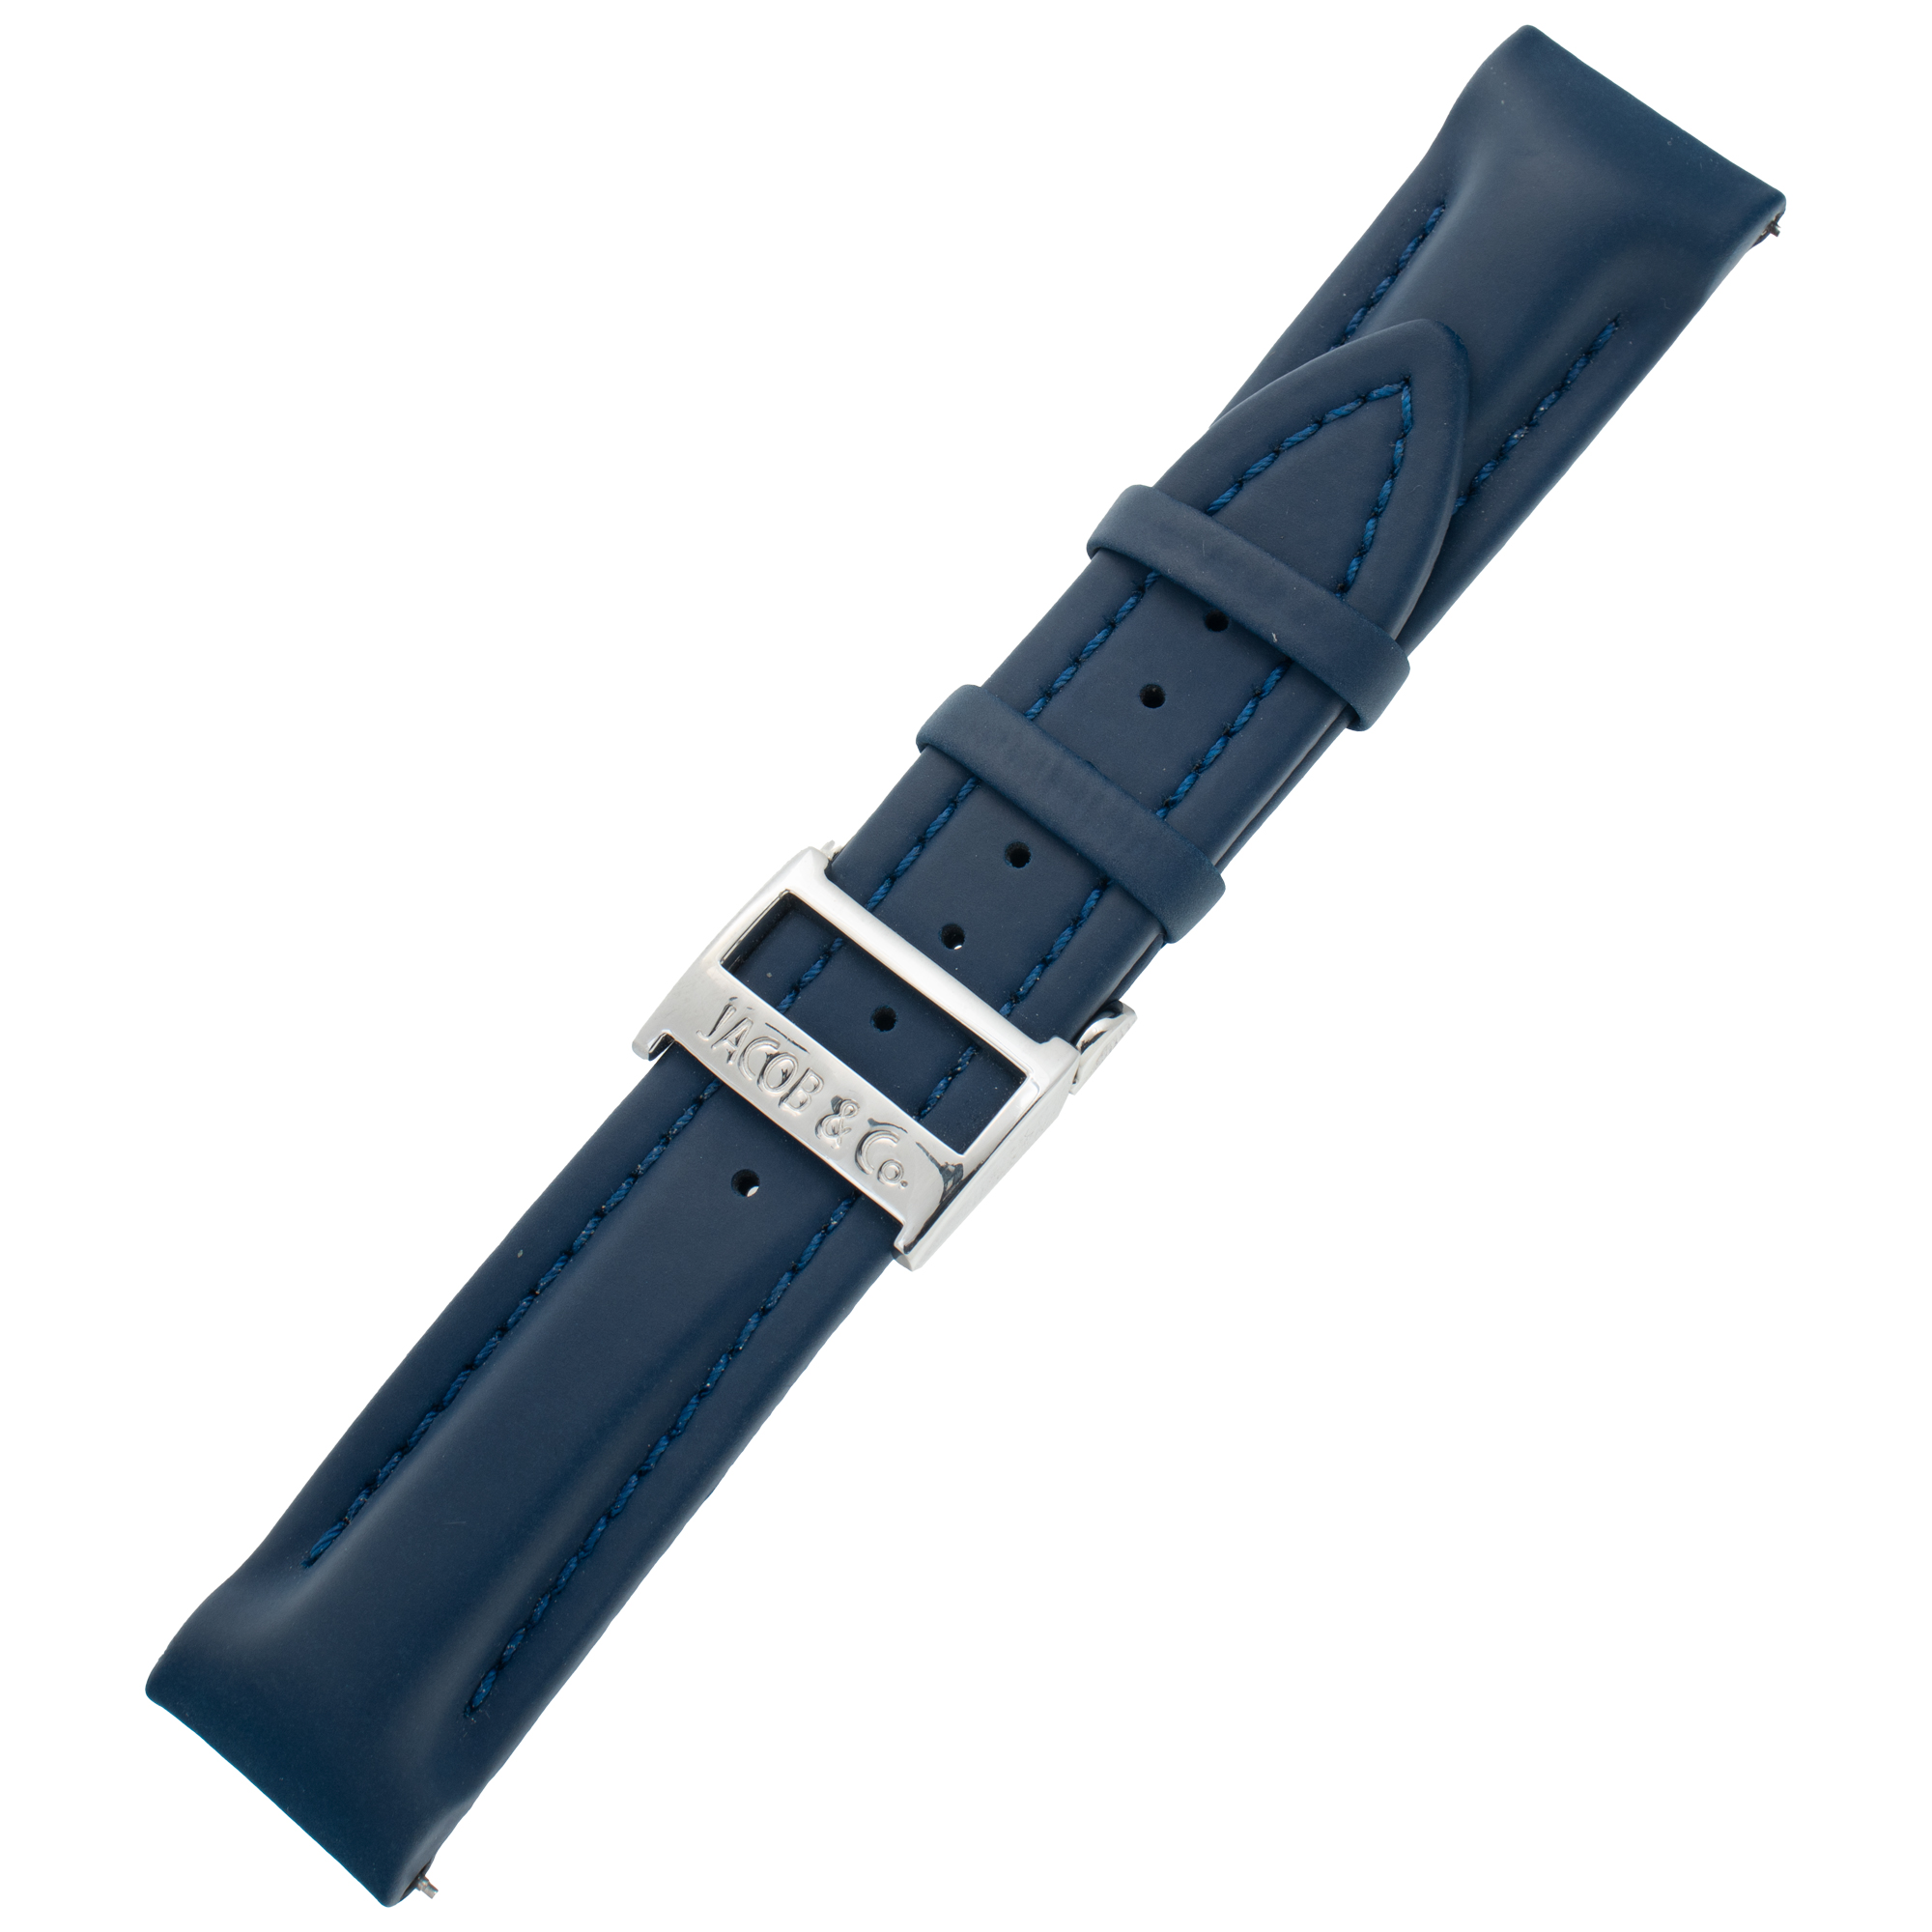 Jacob & Co. Polyurethane Water Resistant Navy Strap 22mm x 20mm